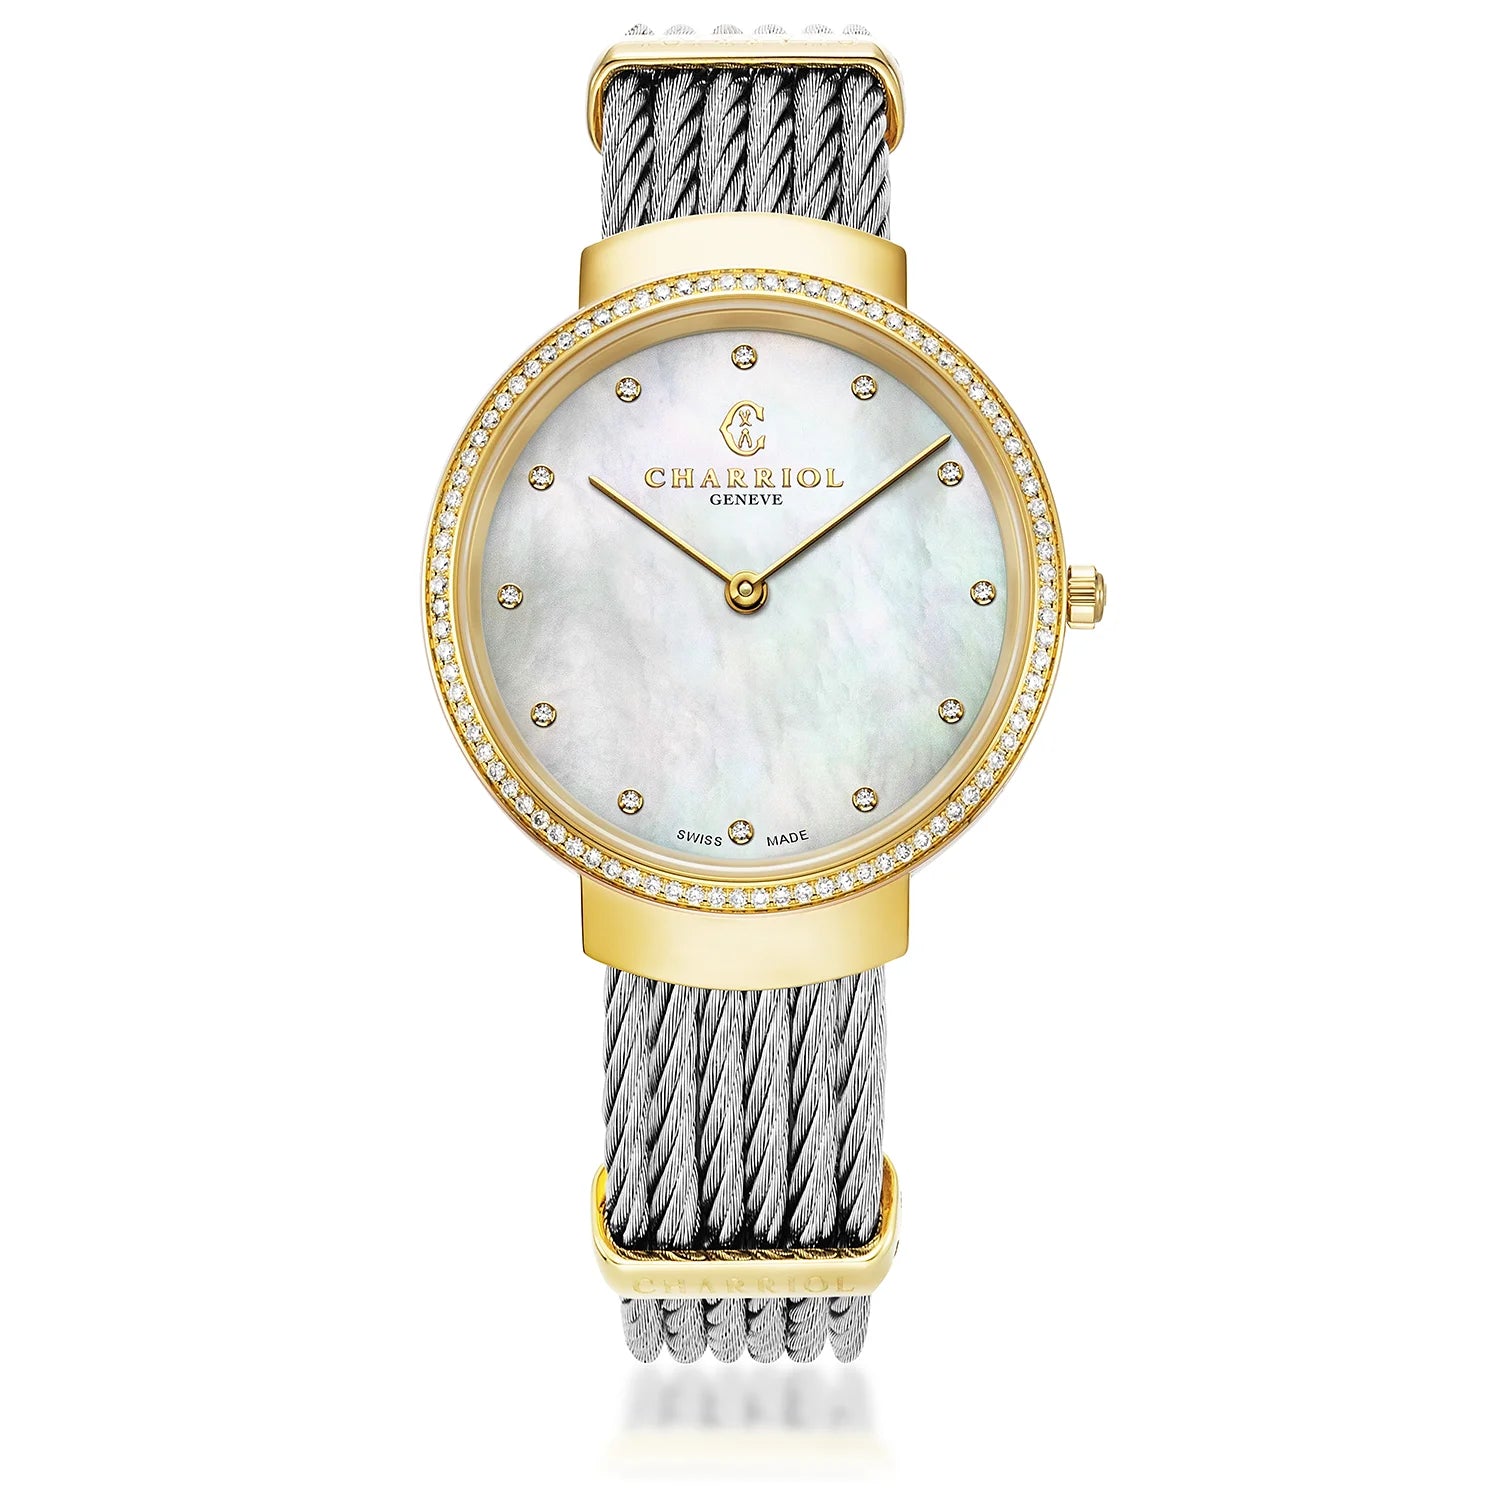 SLIM, 34MM, QUARTZ CALIBRE, WHITE MOTHER OF PEARL DIAL, STEEL YELLOW GOLD PVD WITH 88 DIAMONDS BEZEL, STEEL CABLE BRACELET - Charriol Geneve -  Watch